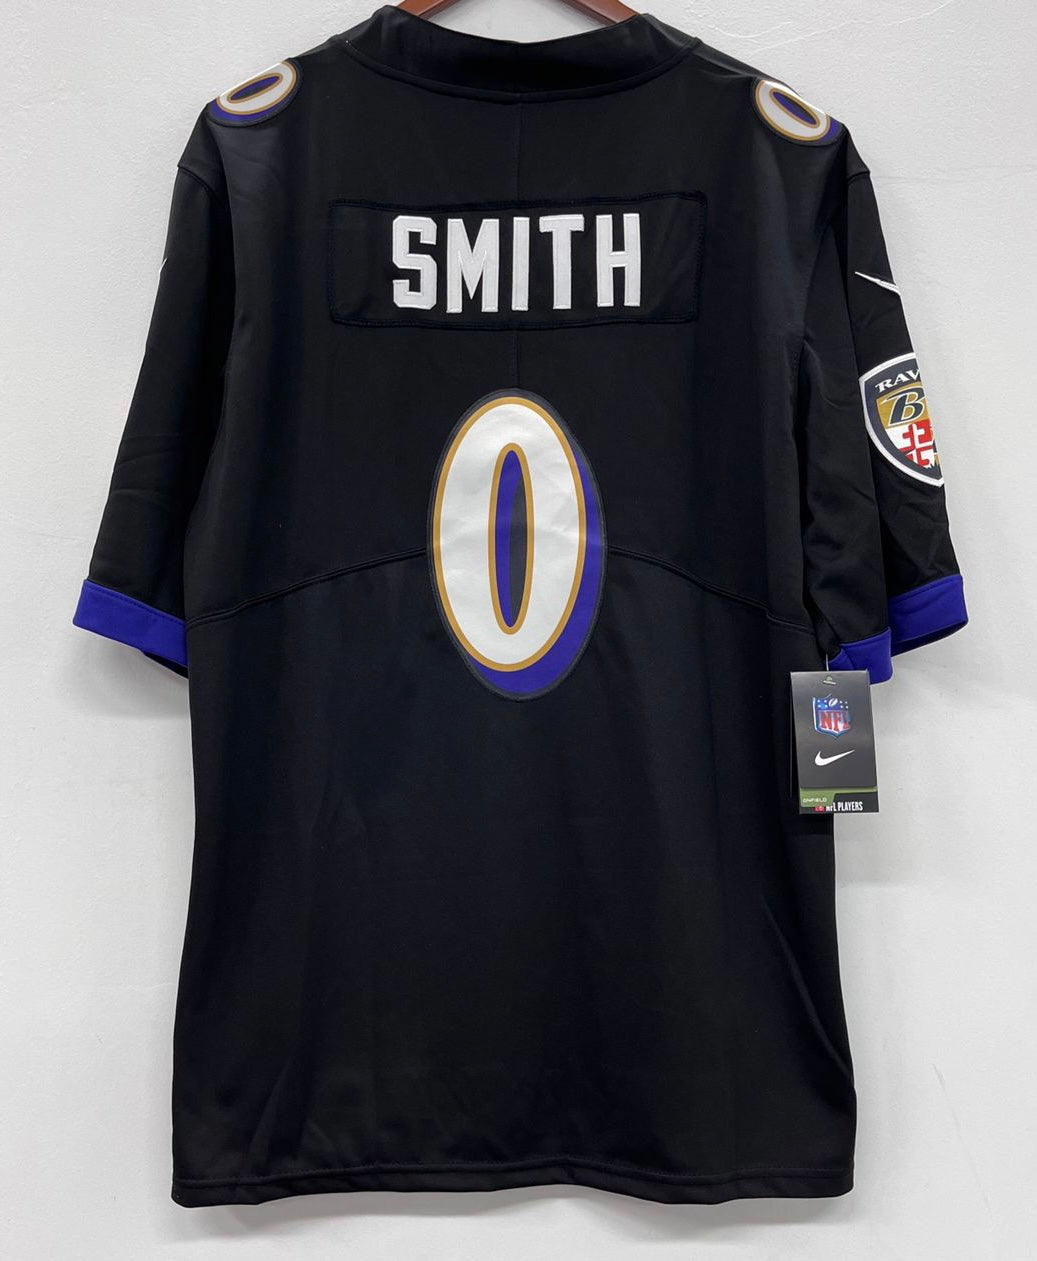 Roquan Smith Baltimore Ravens YOUTH Jersey